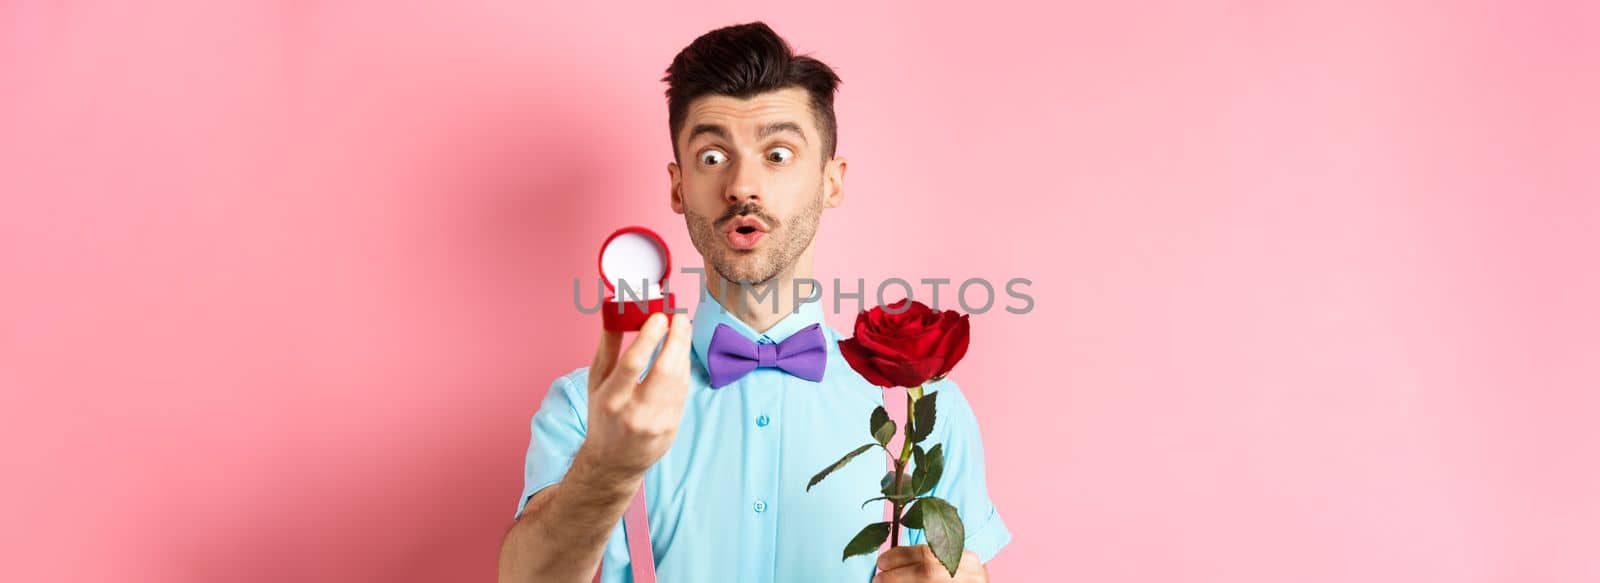 Valentines day. Romantic funny guy going to make wedding proposal, asking to marry him, holding red rose and looking at engagement ring with excitement, pink background.